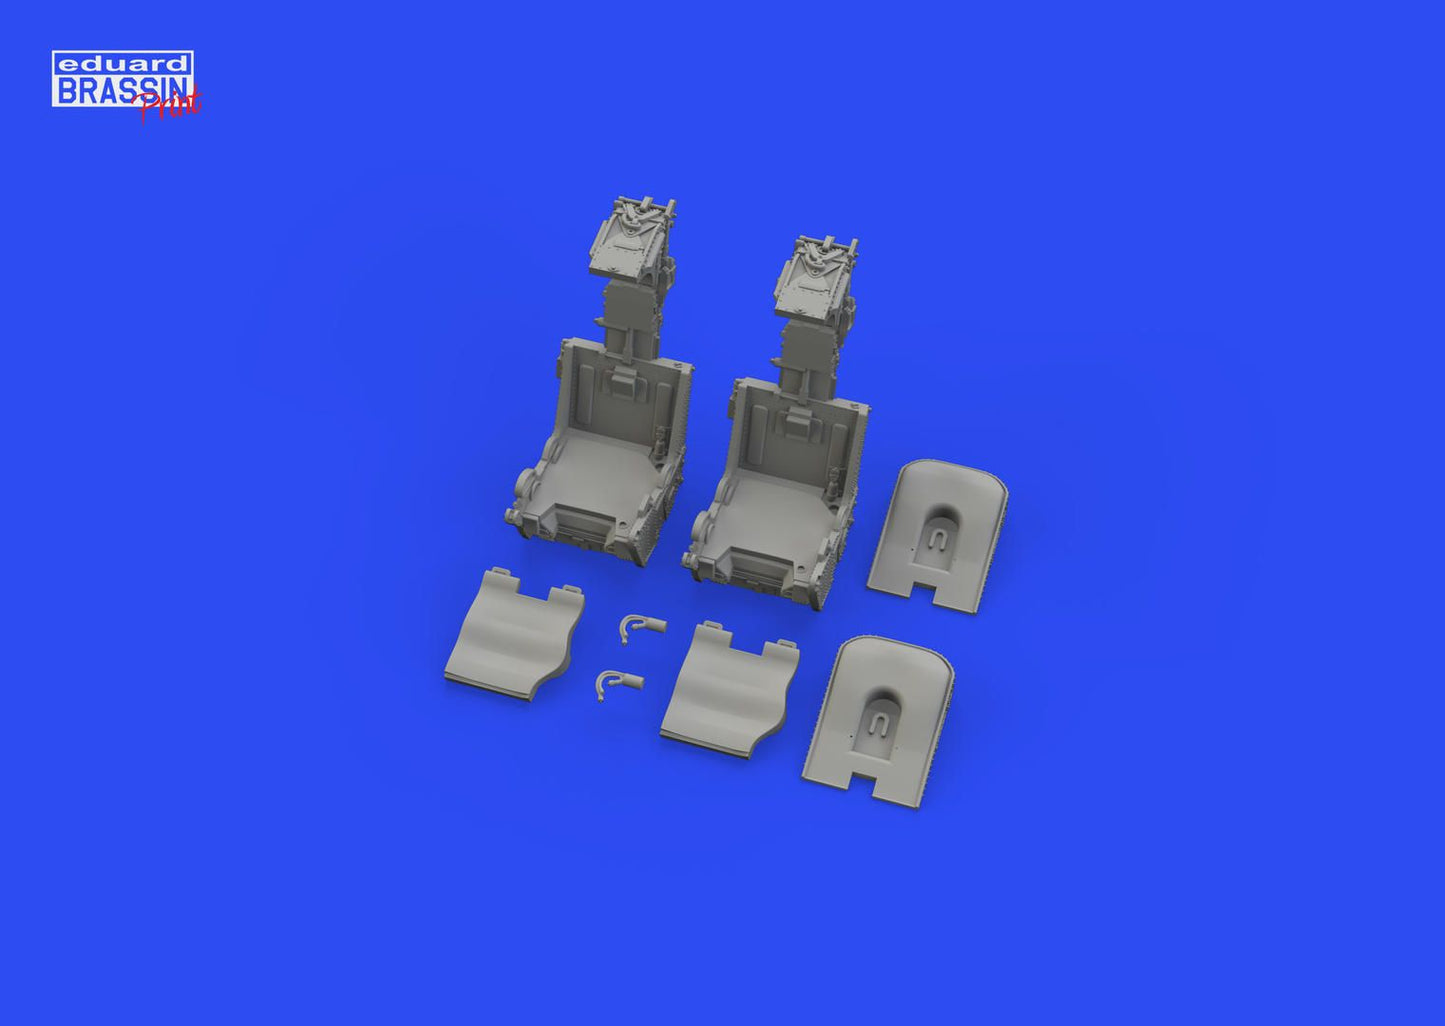 Eduard Brassin 648709 F-4B ejection seats early 3D print for Tamiya 1/48